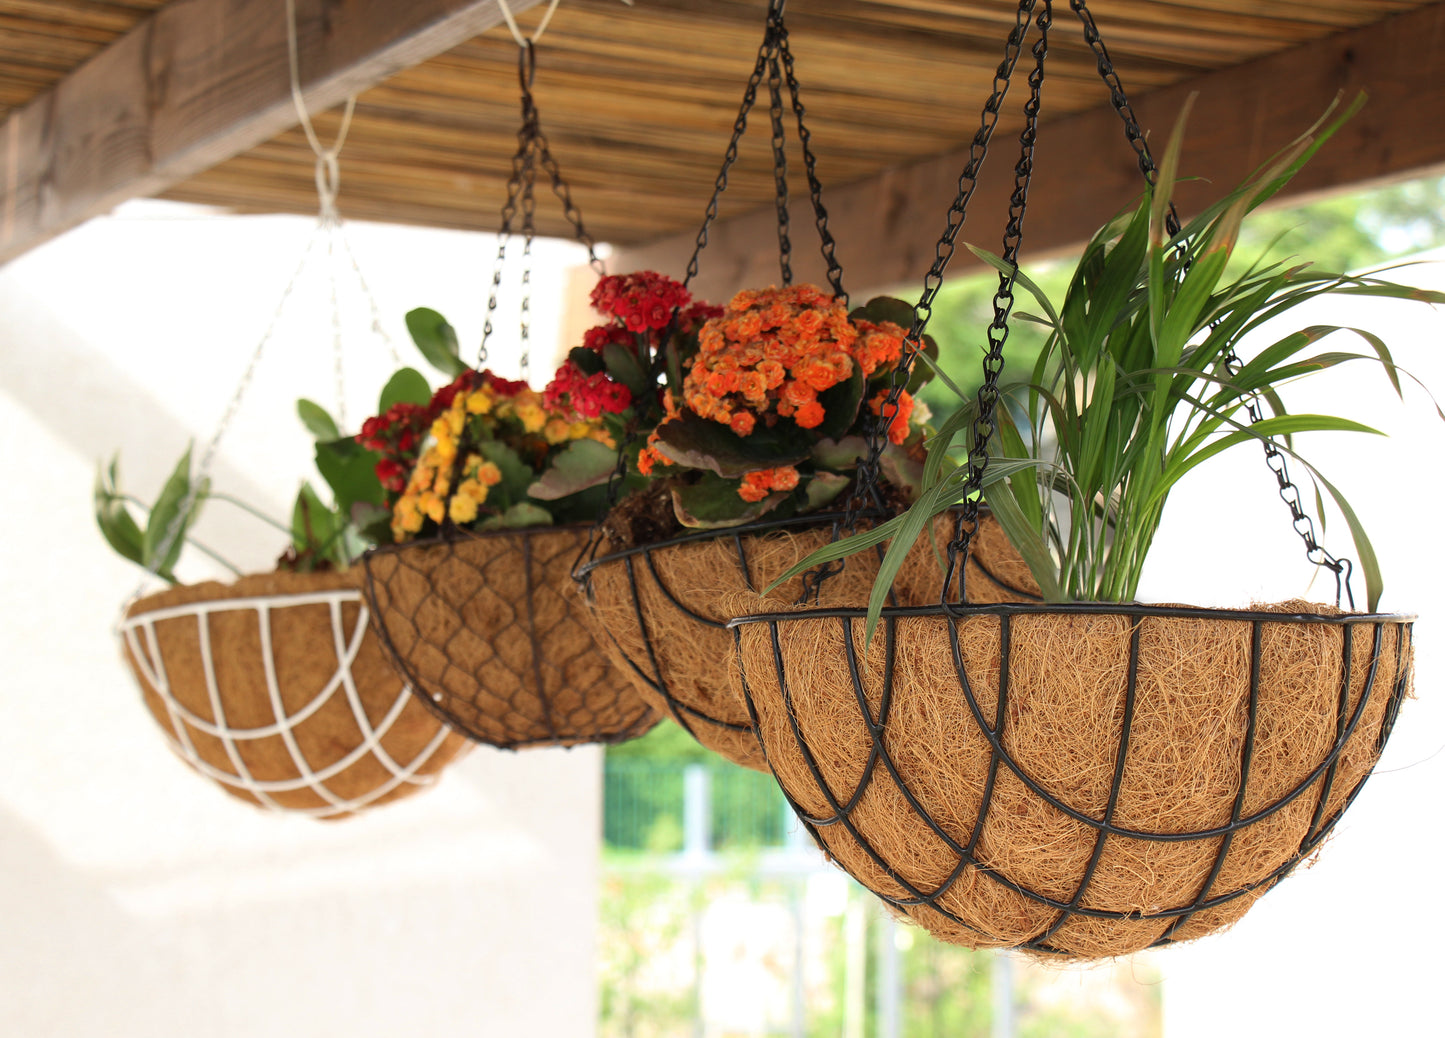 Coconut Hanging Planters, 2 Pack - 12 variations